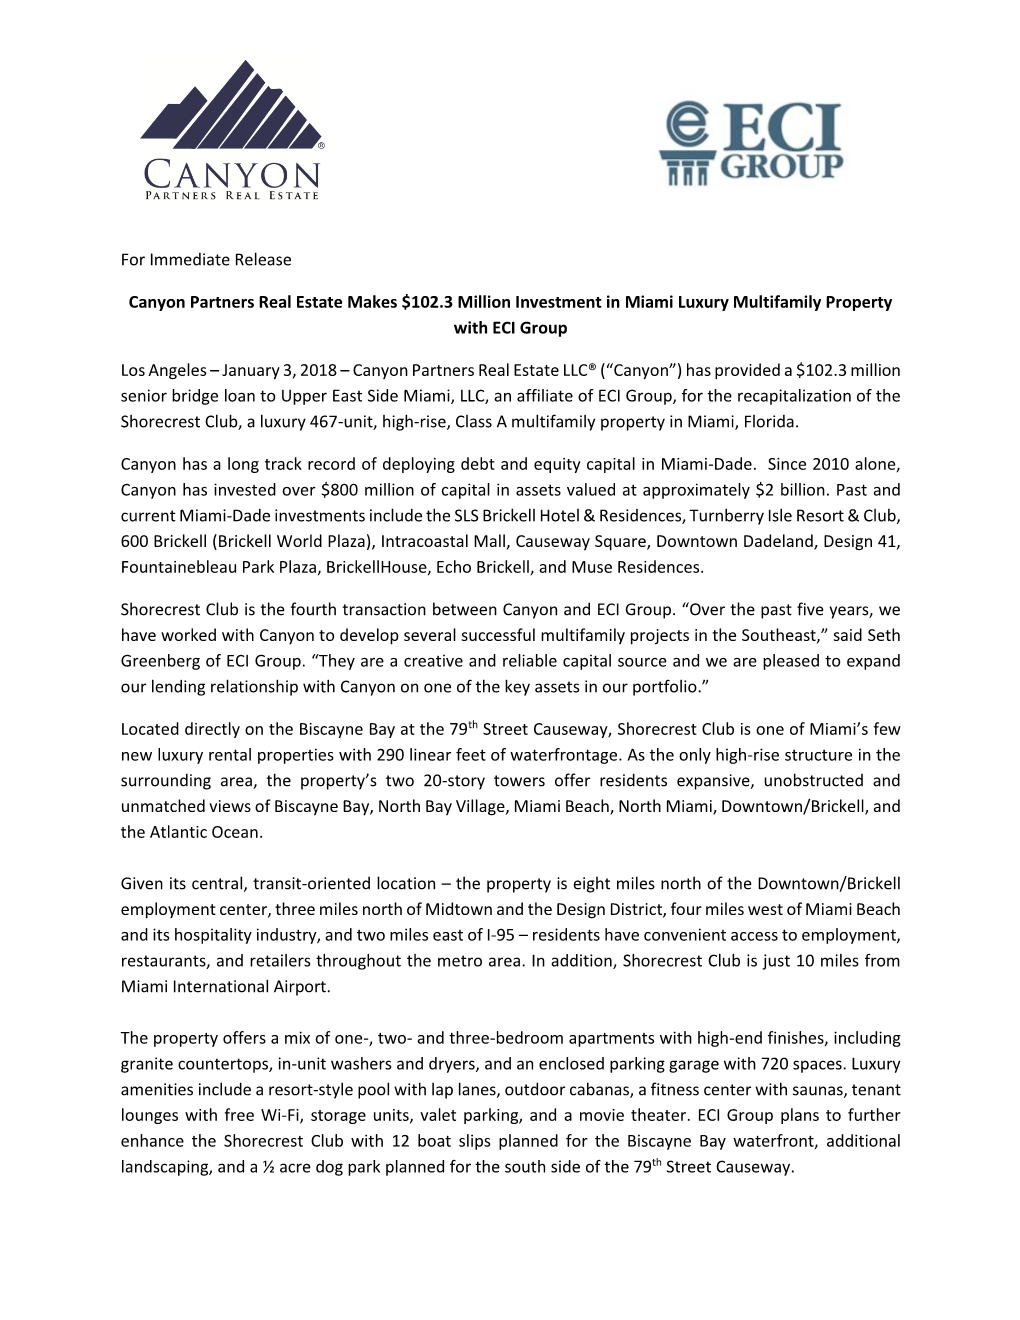 For Immediate Release Canyon Partners Real Estate Makes $102.3